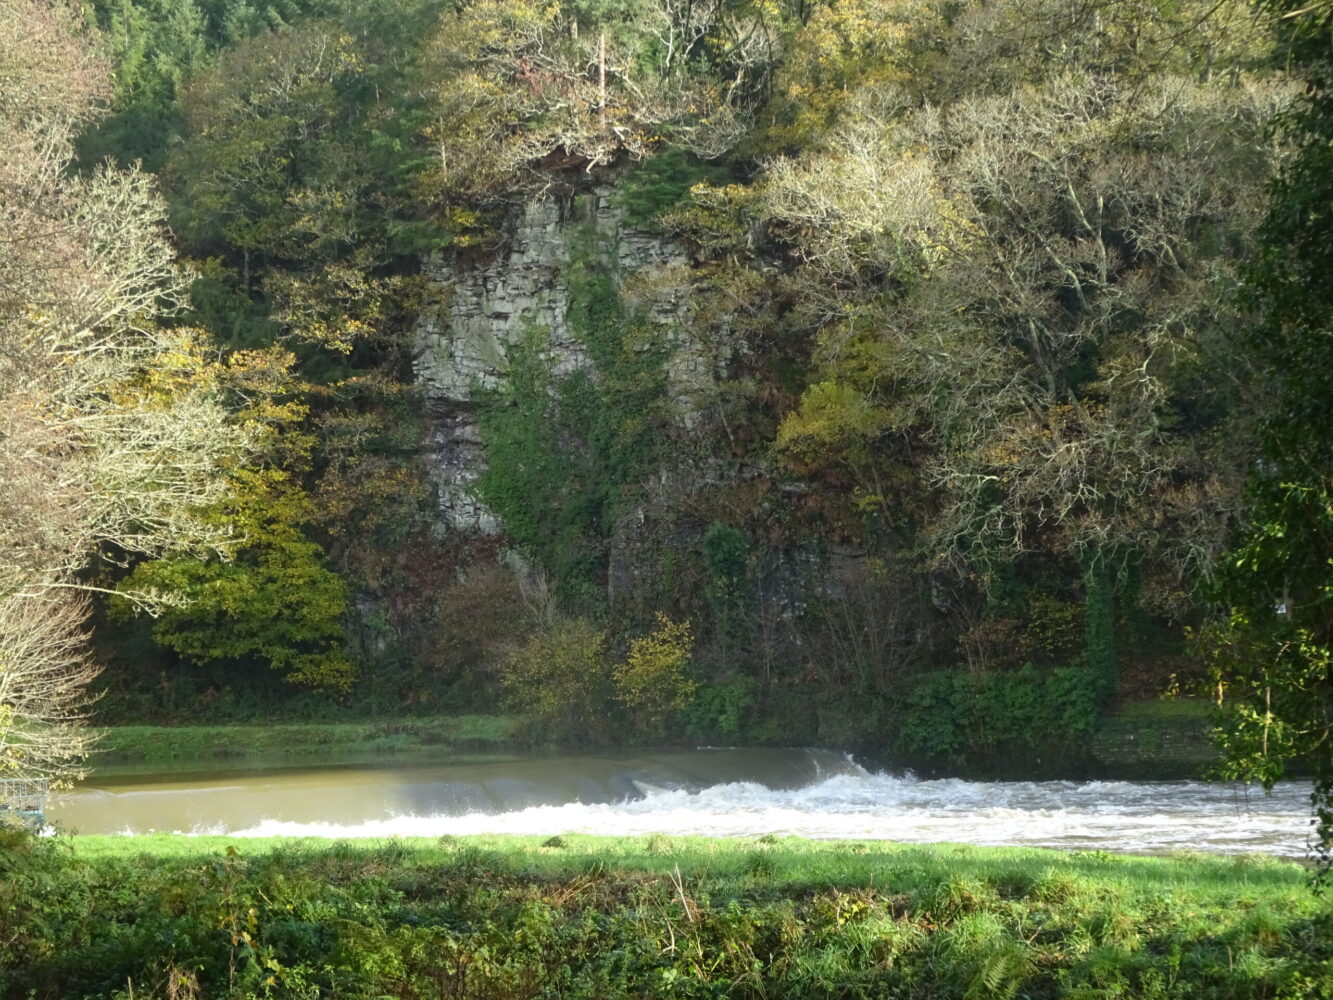 Weir on the River Tamar at Gunnislake: the tidal limit of the river